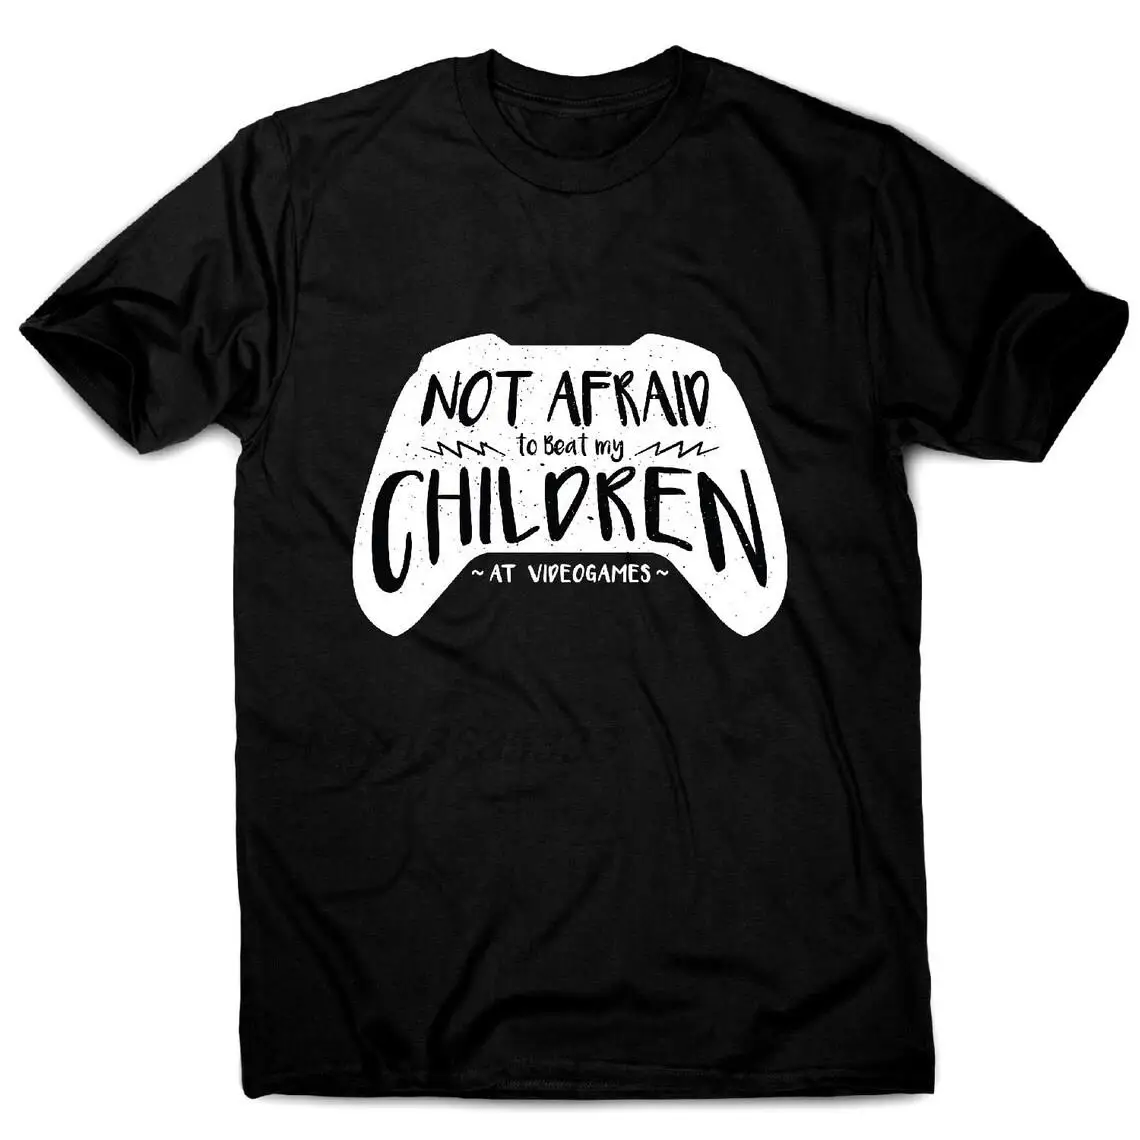 

Not Afraid To Beat My Children At Videogames Man Funny Retro T-shirts Unisex Vintage Oversized Clothing Male Short Sleeve Tees